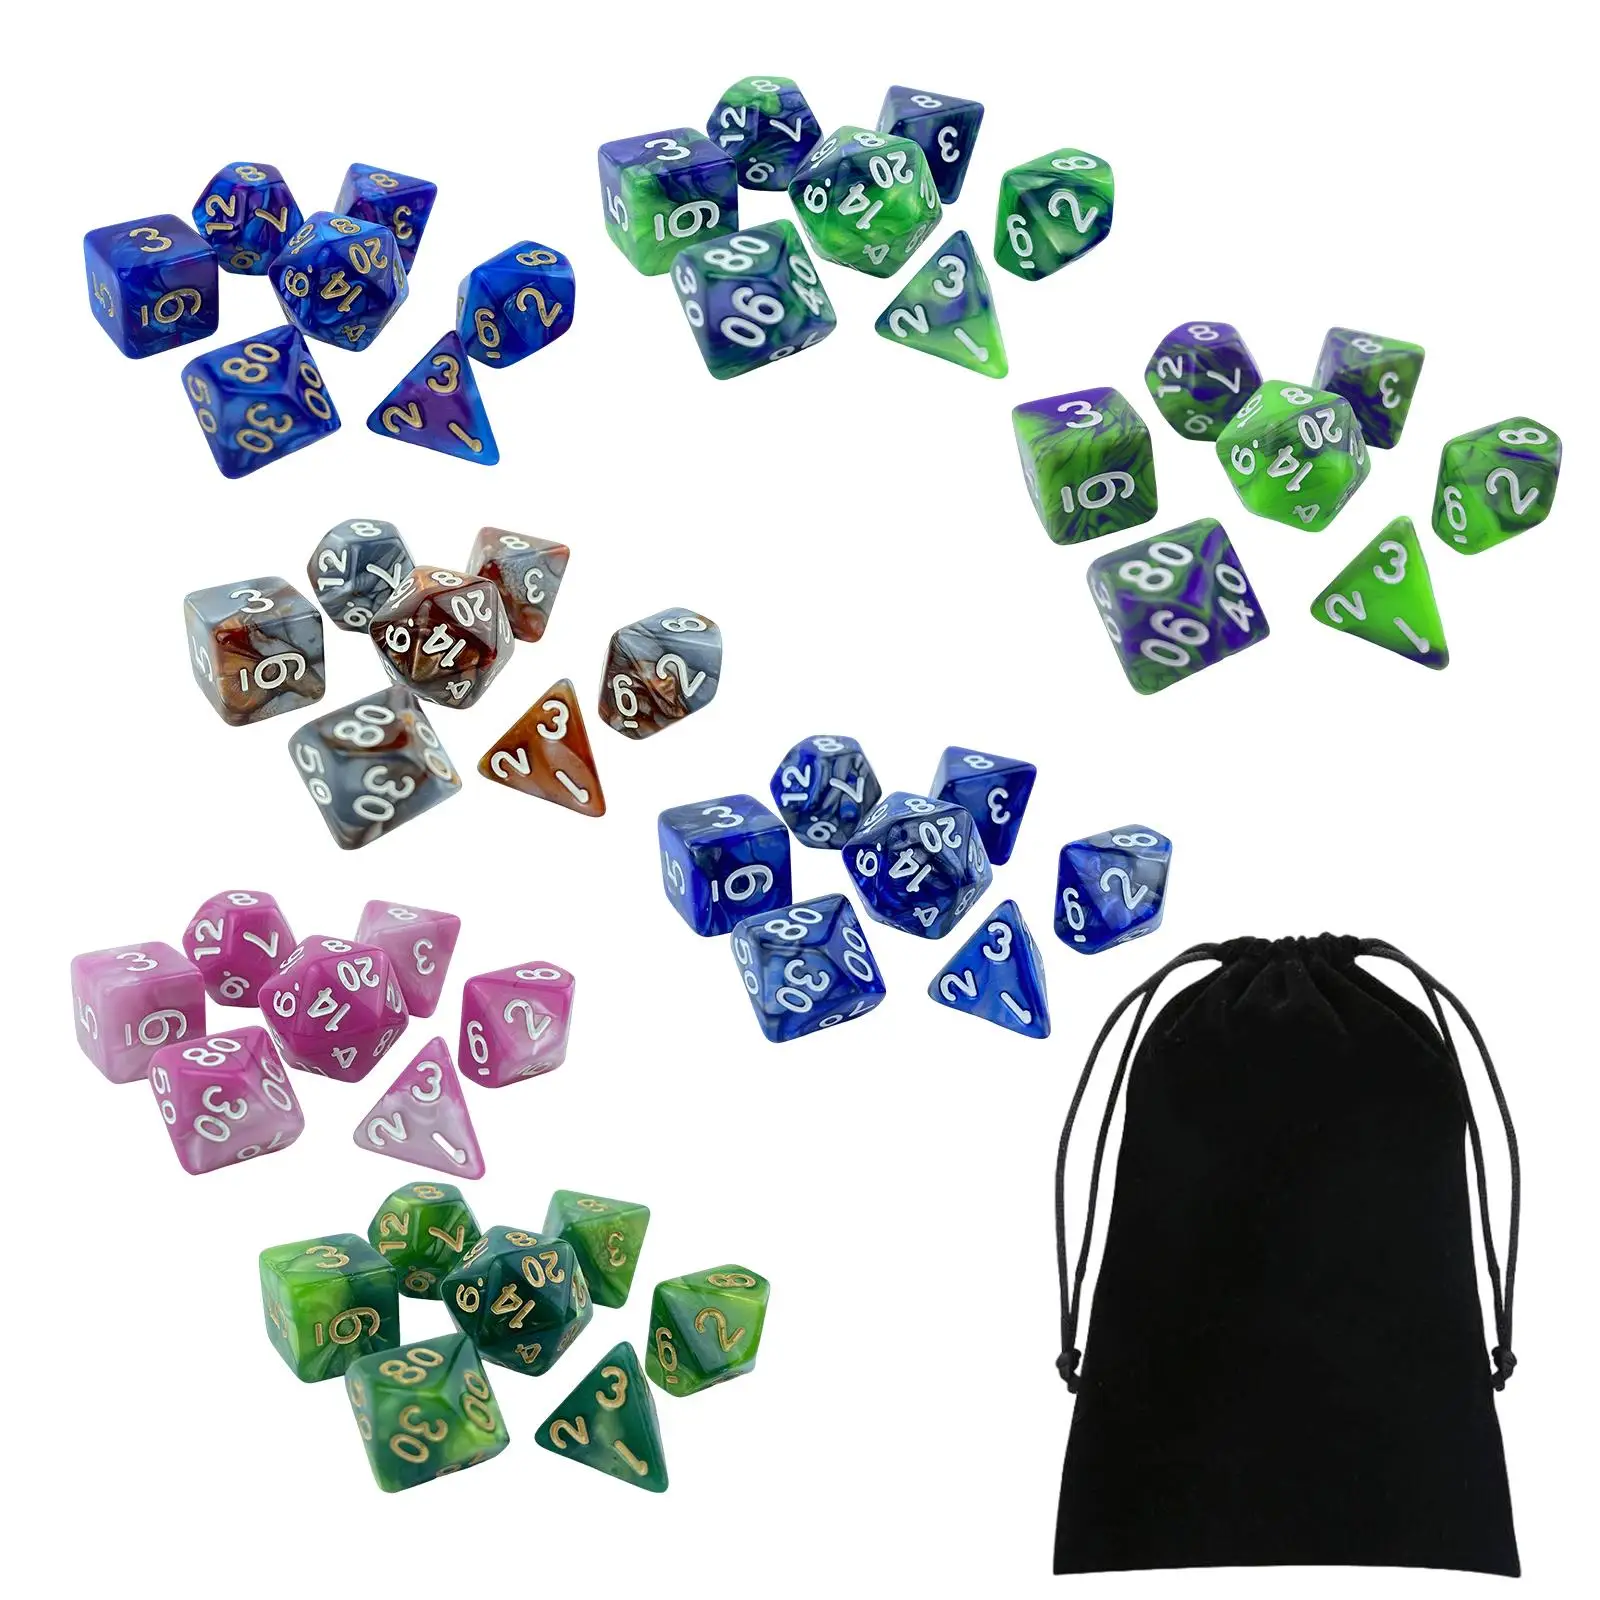 49x Acrylic Polyhedral Dices Set with Storage Bag D8 D10 D12 D20 Toys Math Teaching Rolling Dices for Table Games Parties KTV